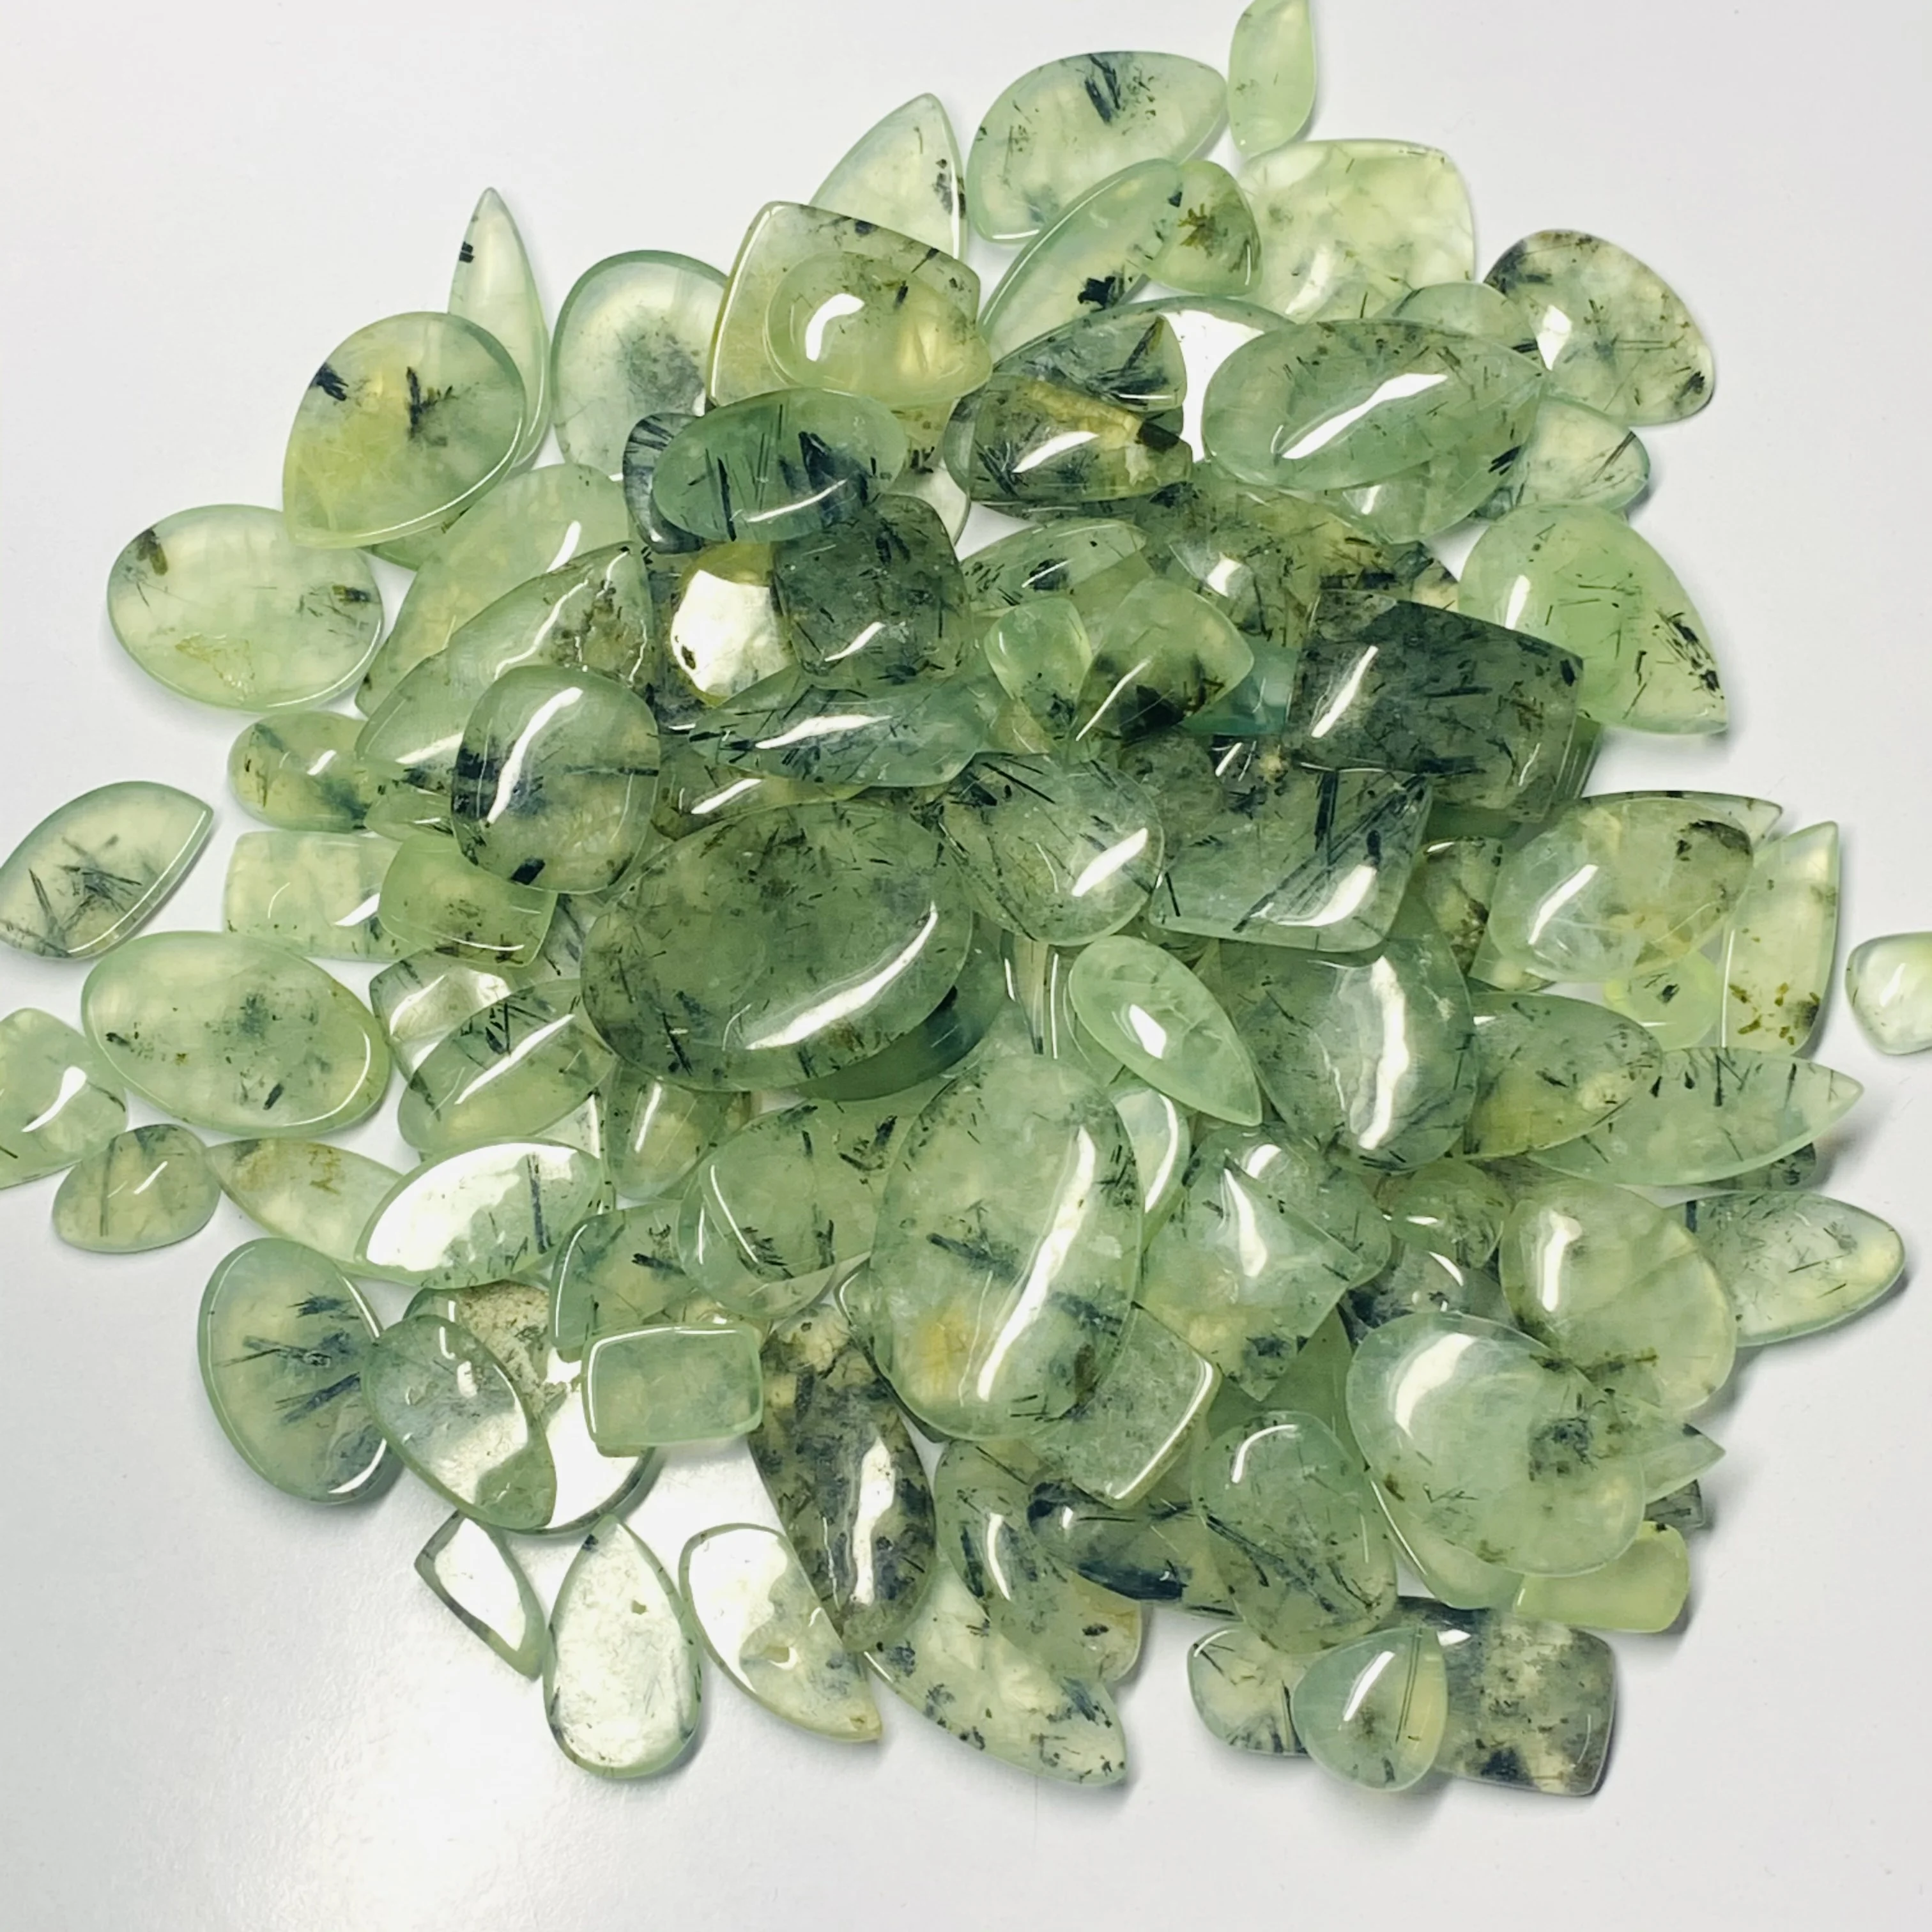 Details about   Rarest Lot Natural Prehnite 15X15 mm Square Faceted Cut  Loose Gemstone 